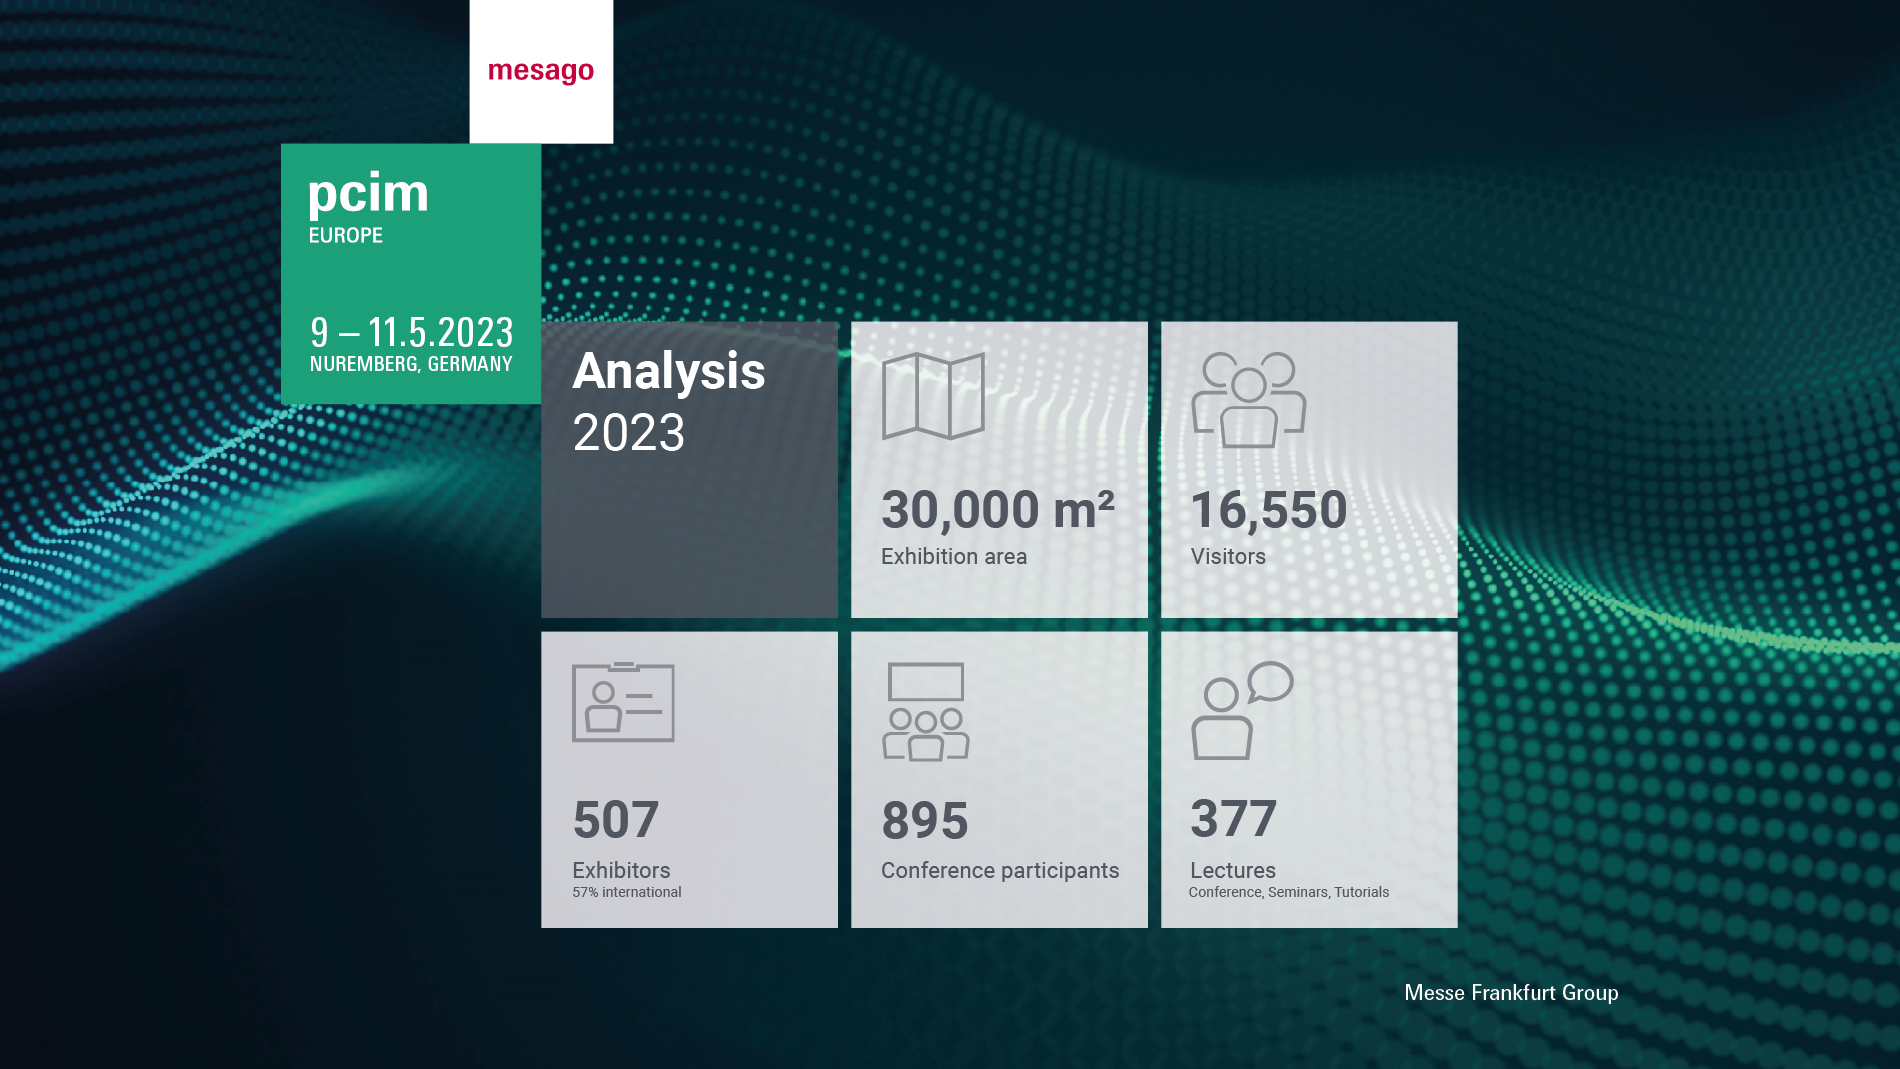 Facts & figures of the PCIM Europe 2023